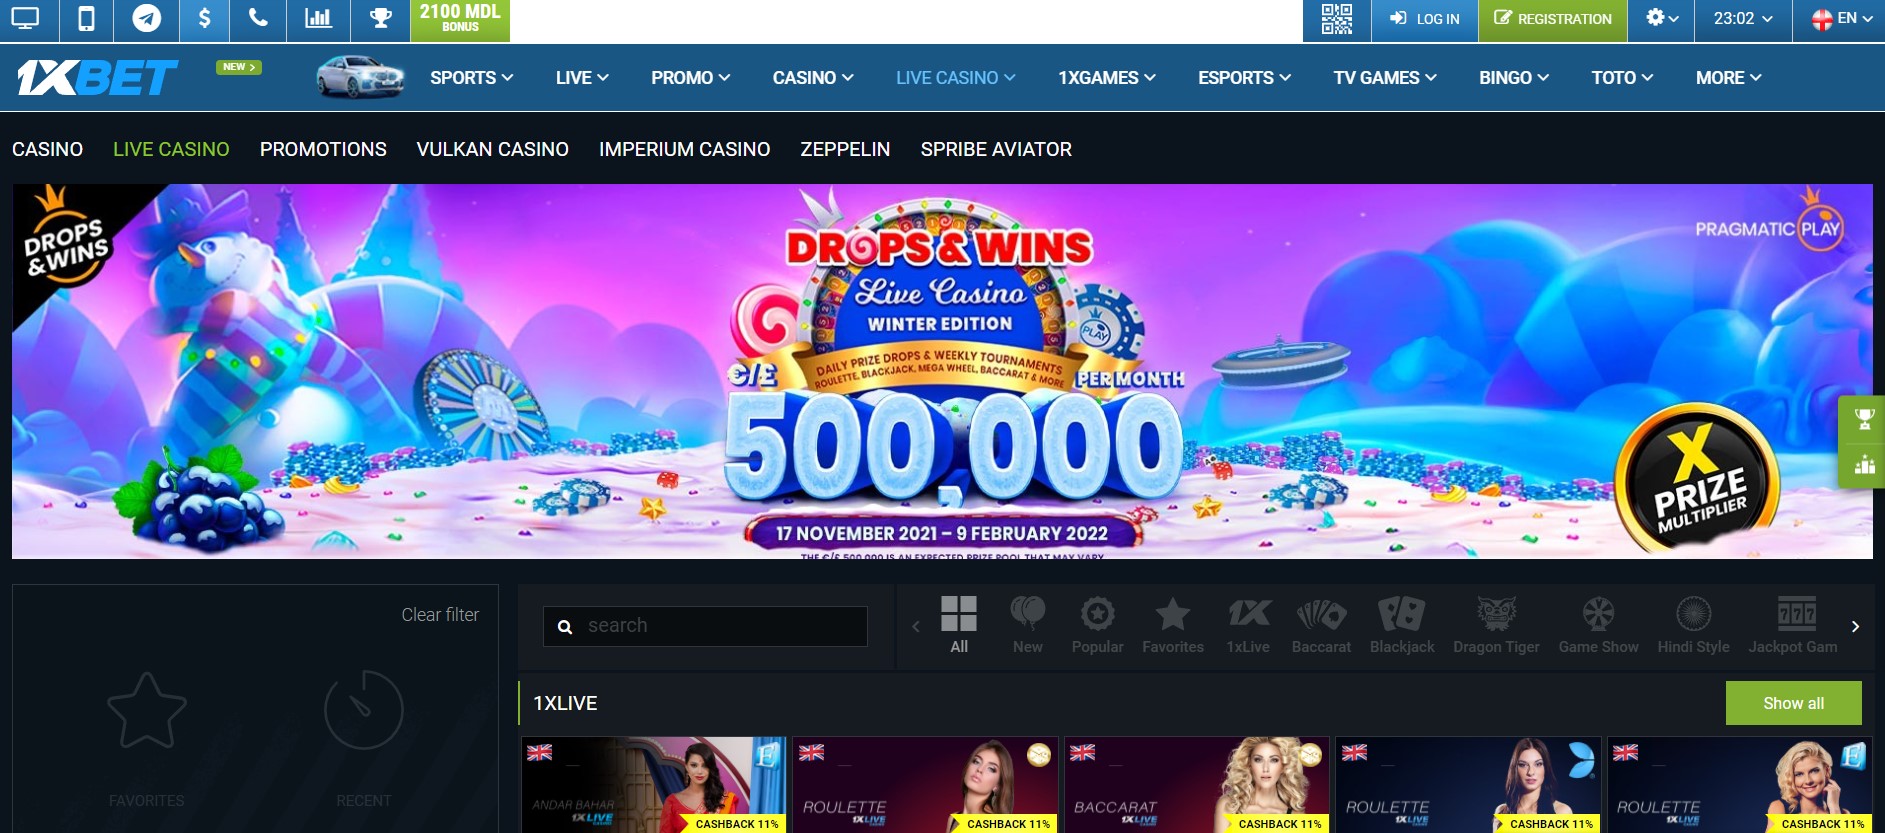 1xbet - one of the biggest and most popular online casinos in Dubai